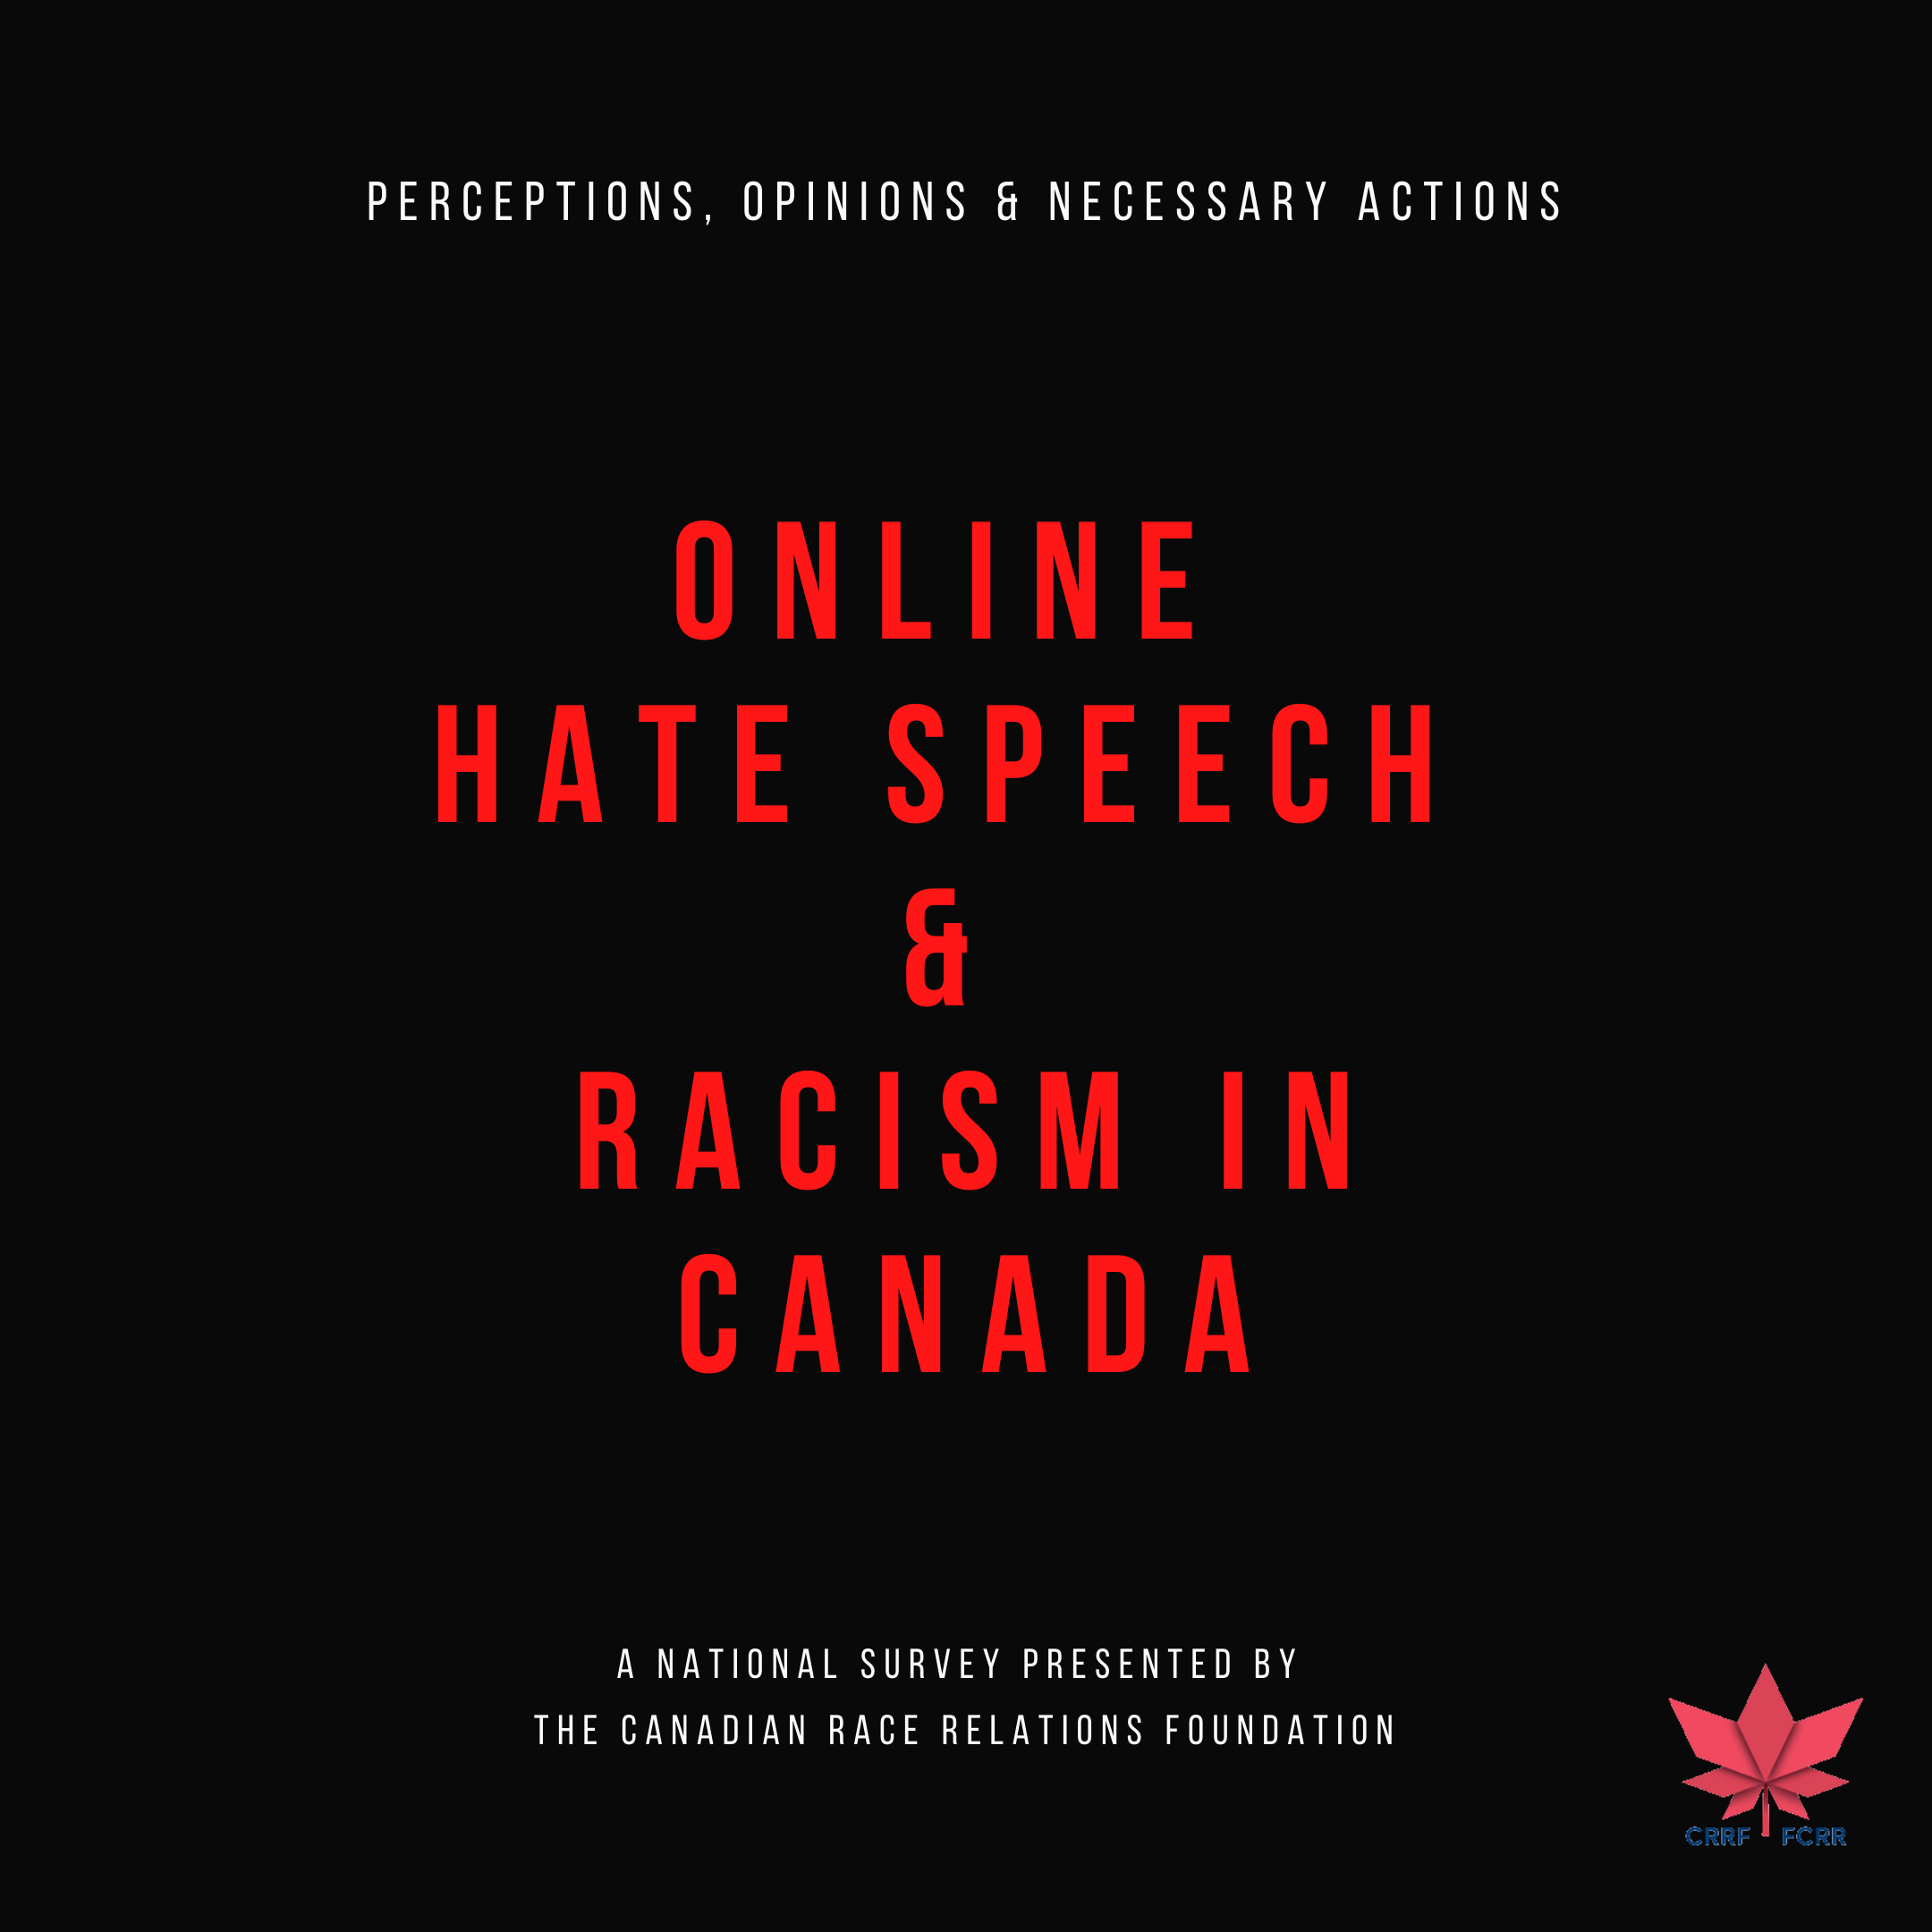 CRRF Releases Poll Results on Online Hate Speech and Racism in Canada